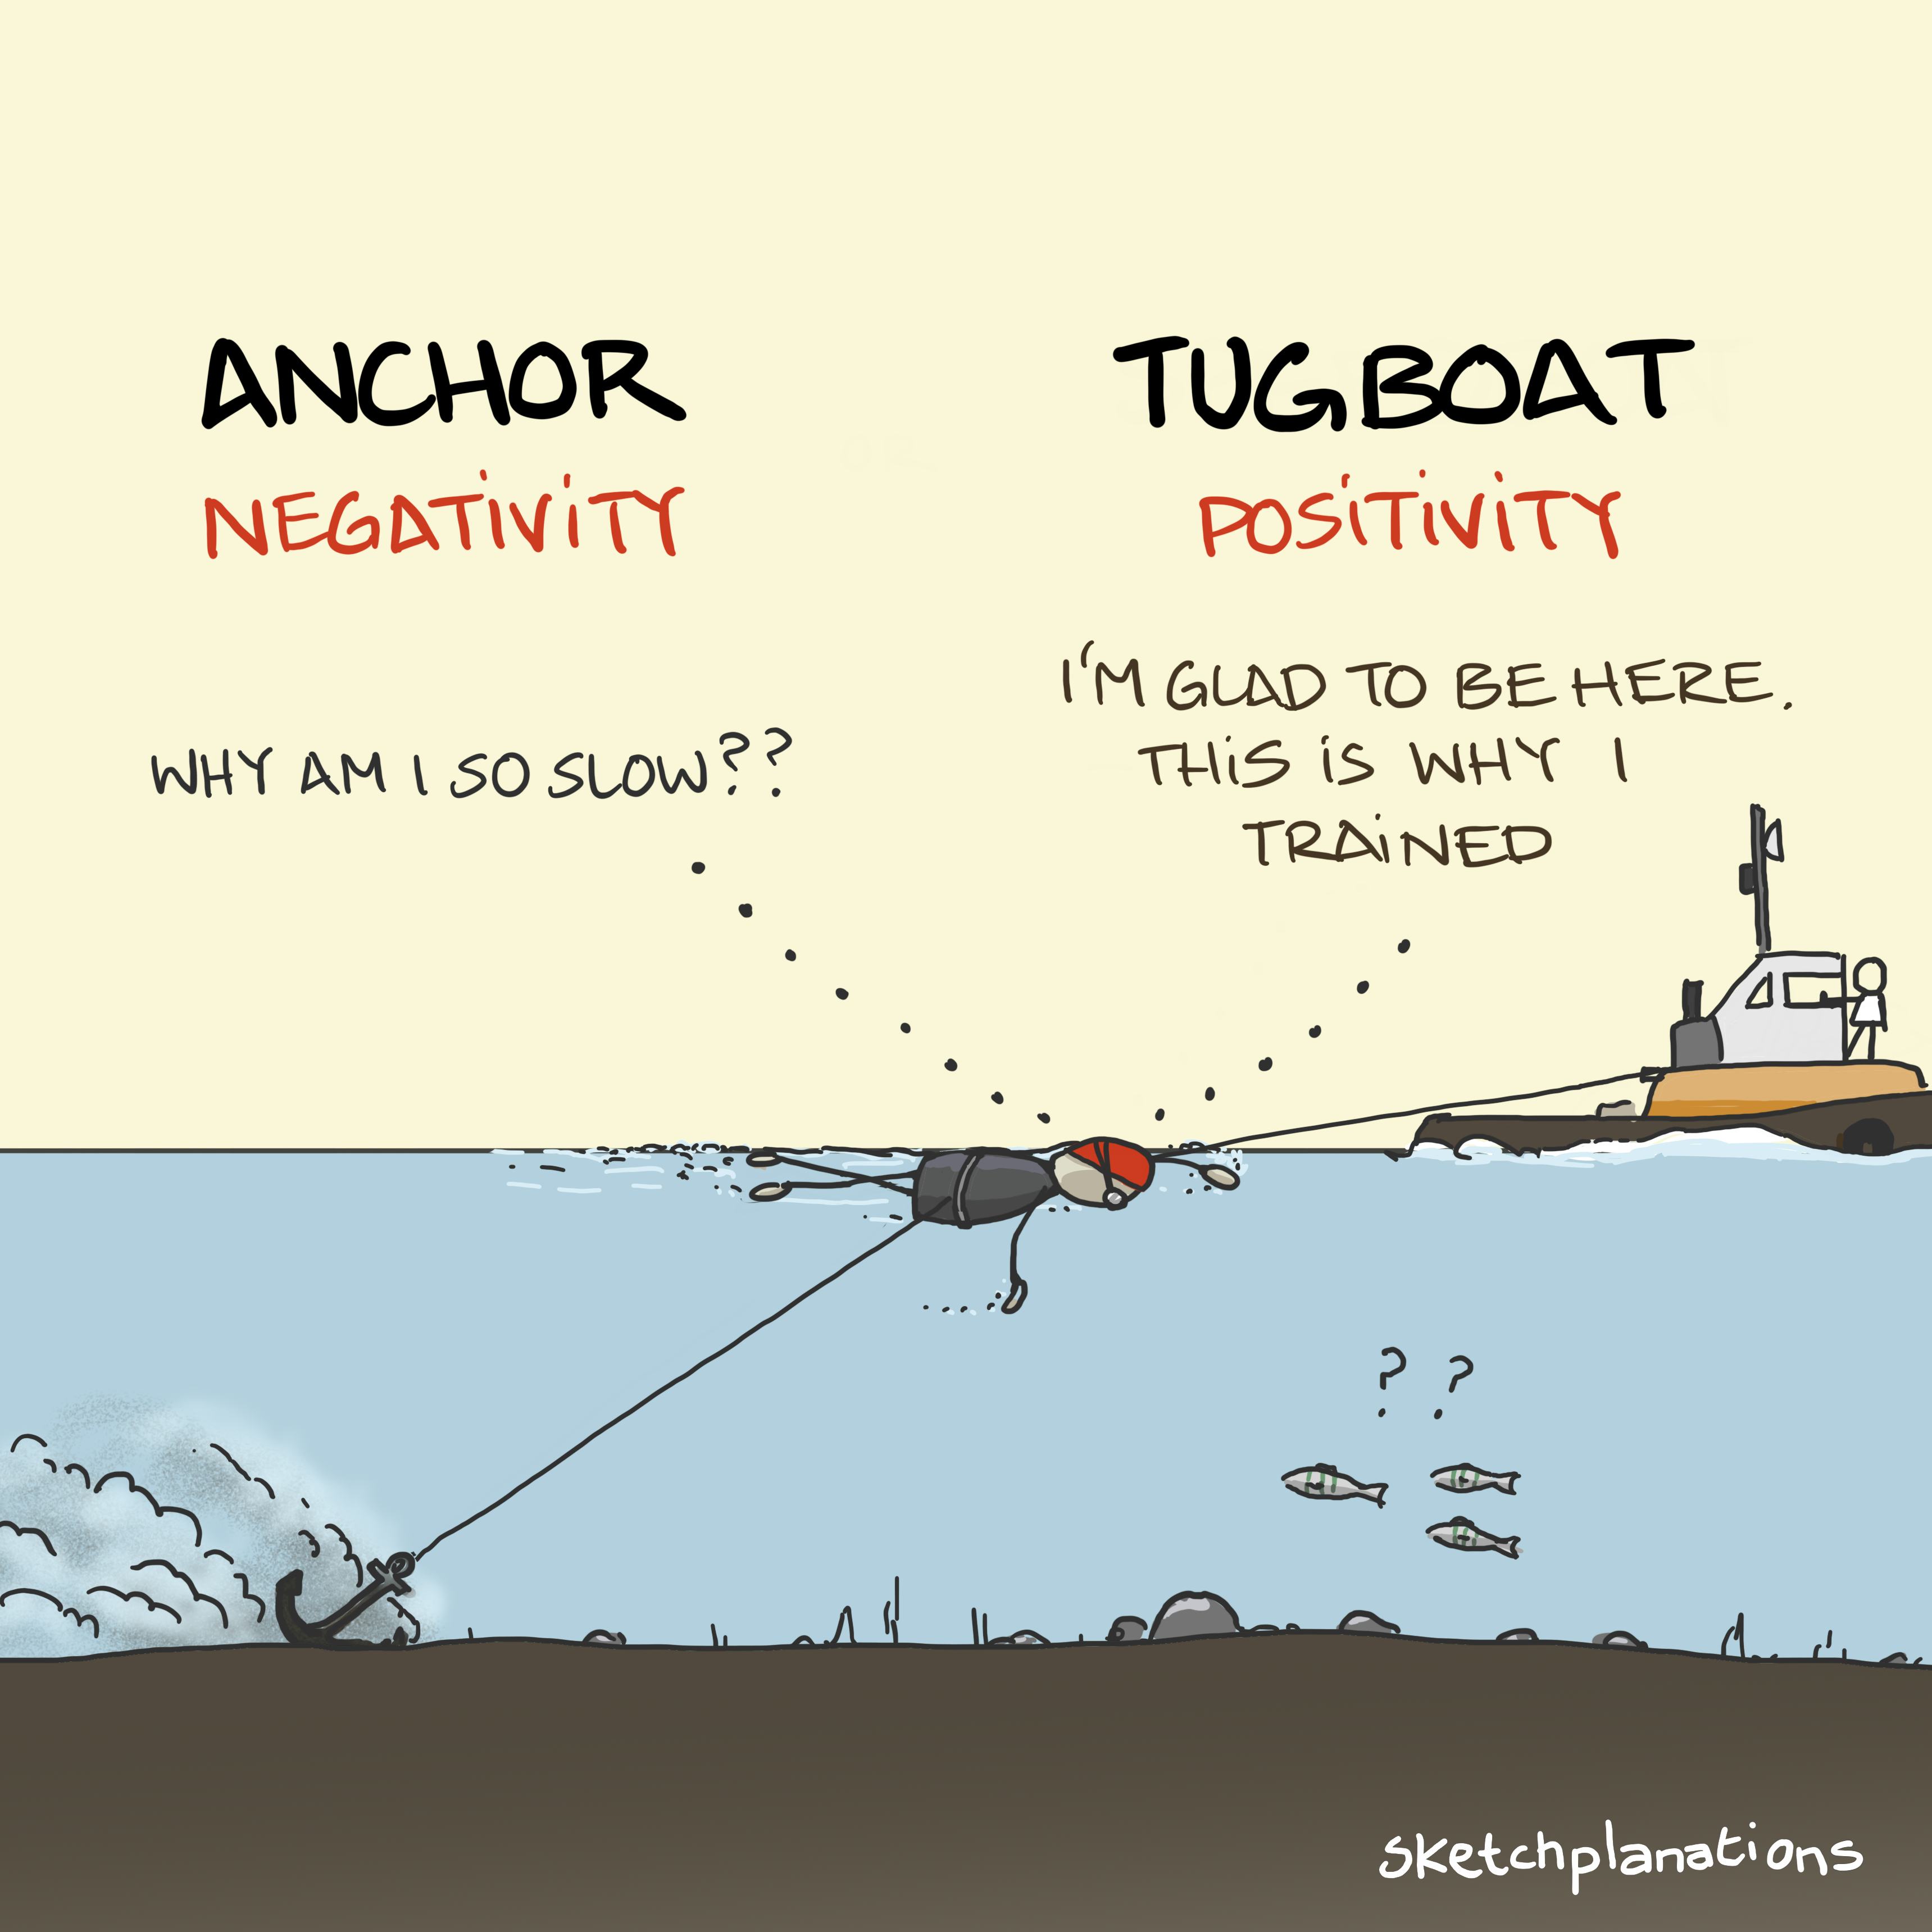 Anchors and tugboats illustration: a swimmer thinking negative thoughts is pulled back by an anchor and thinking positive thoughts is pulled forward by a tug. Confused fish look on.